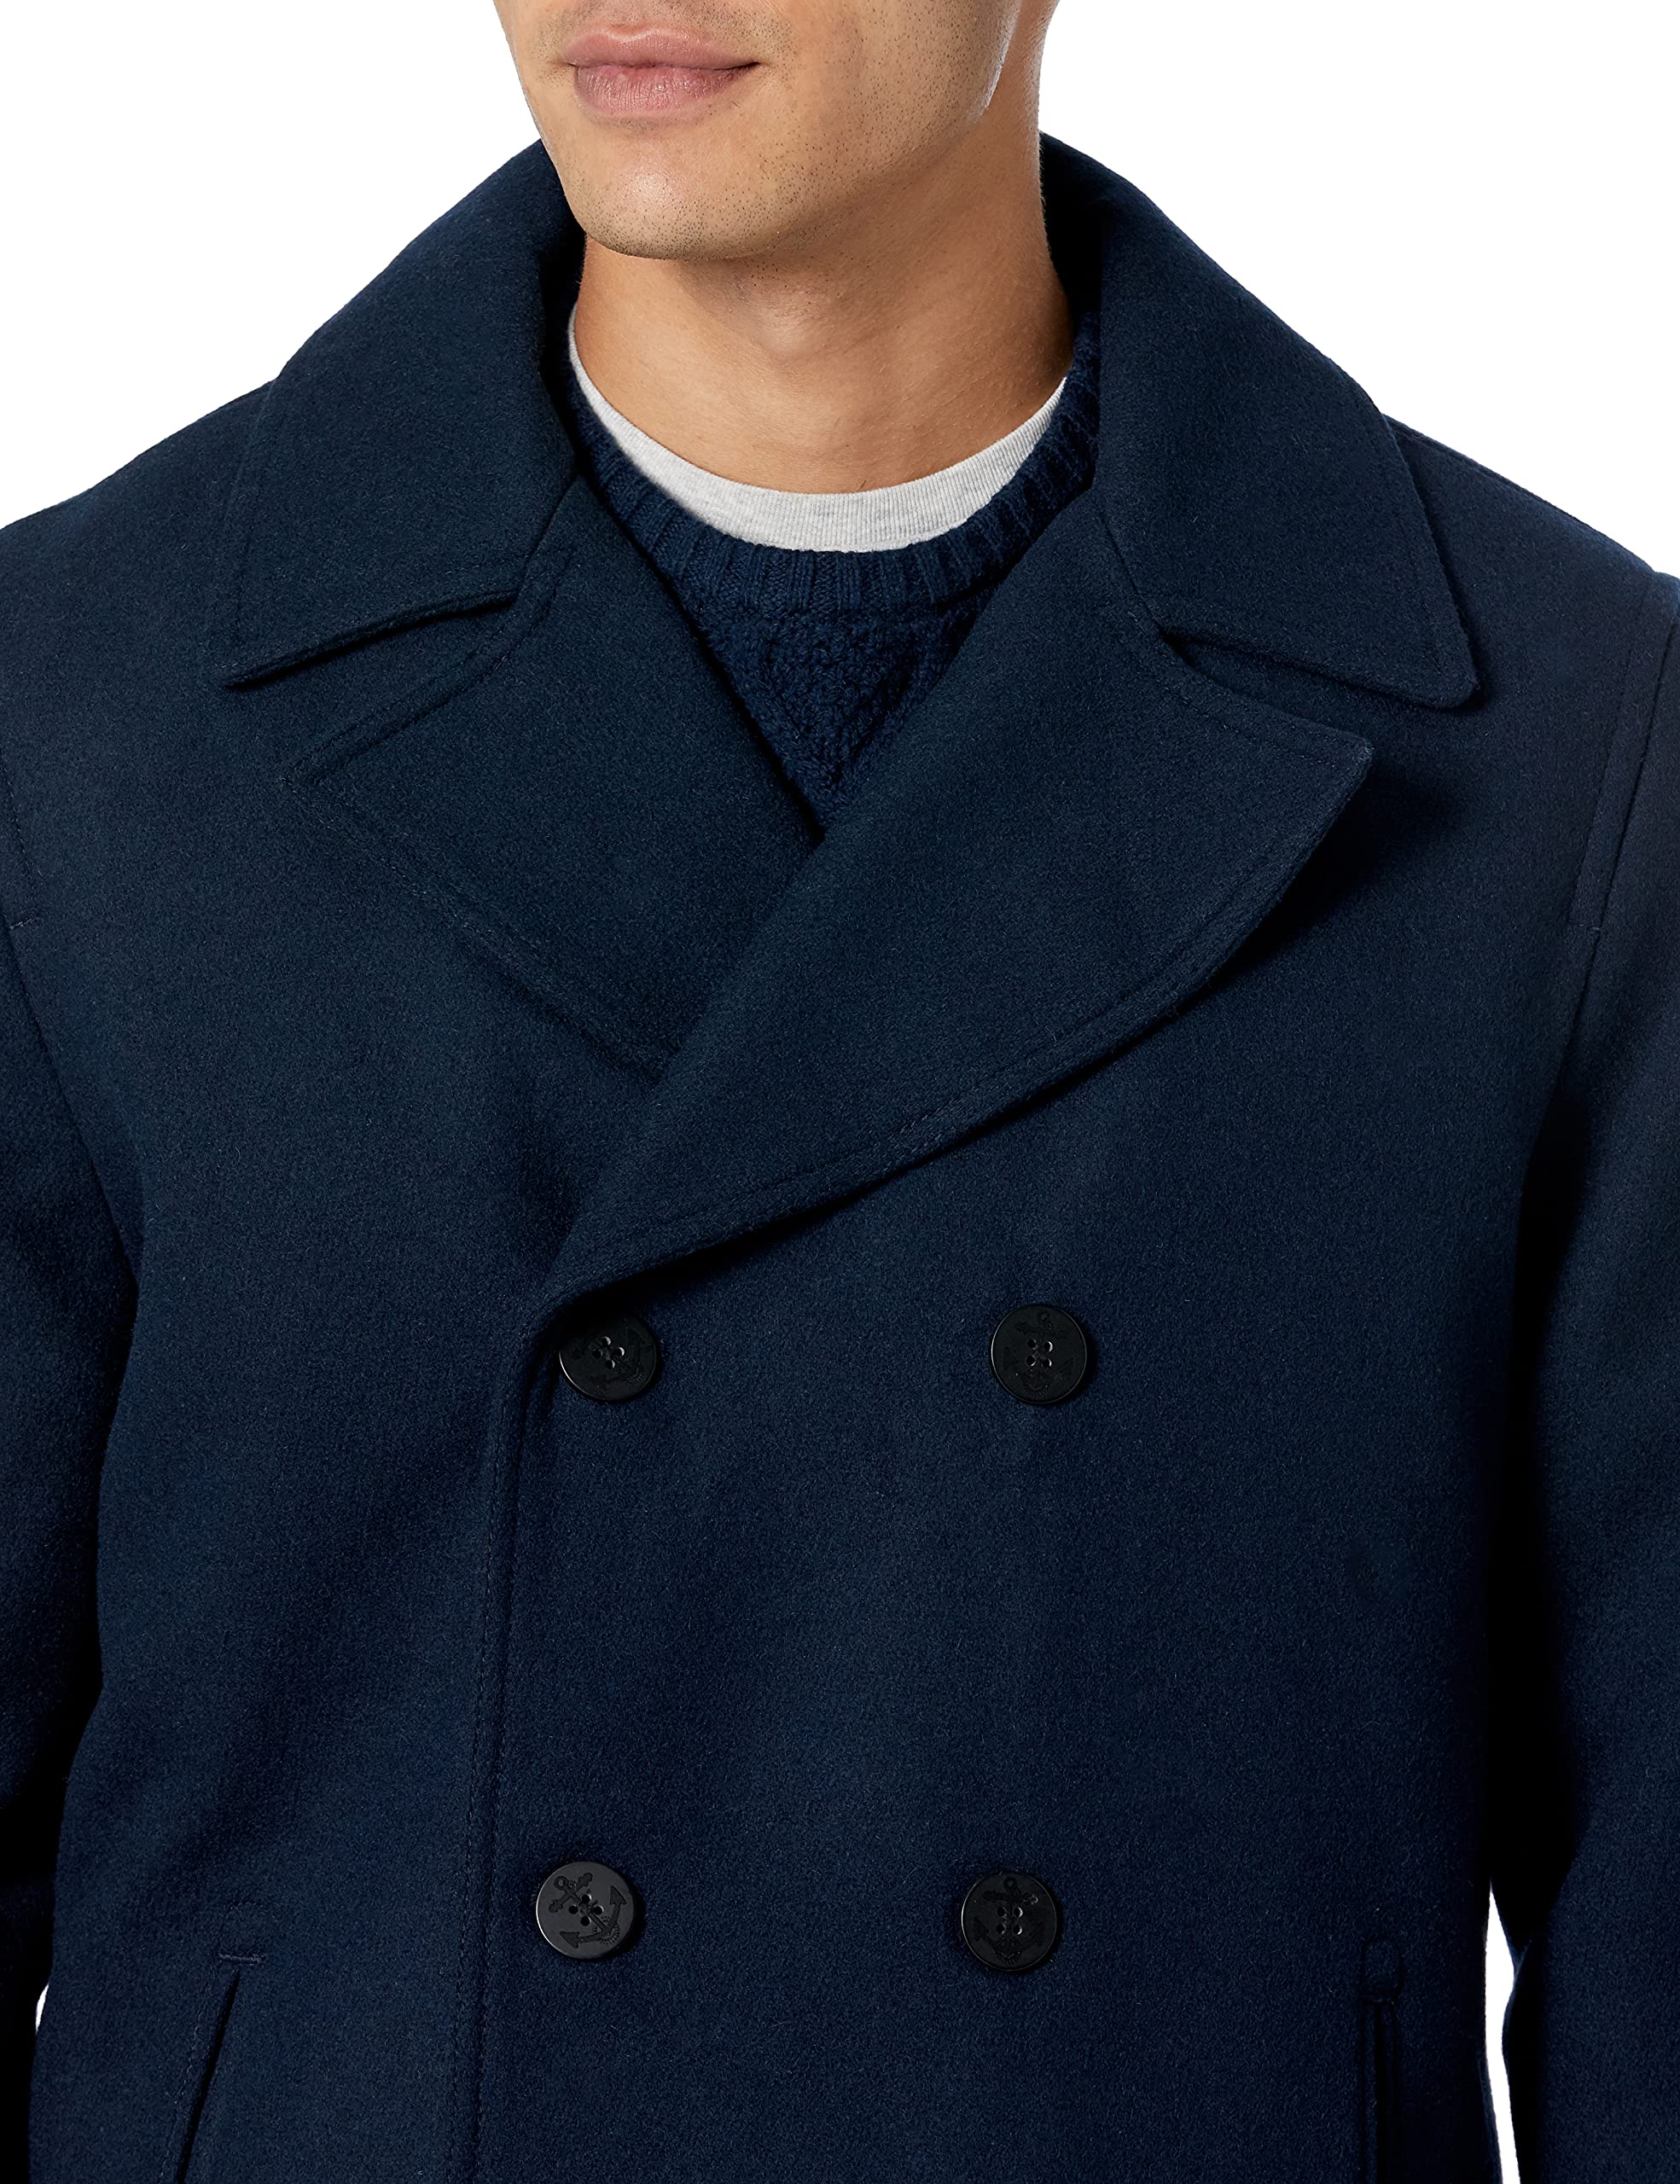 Amazon Essentials Men's Double-Breasted Heavyweight Wool Blend Peacoat